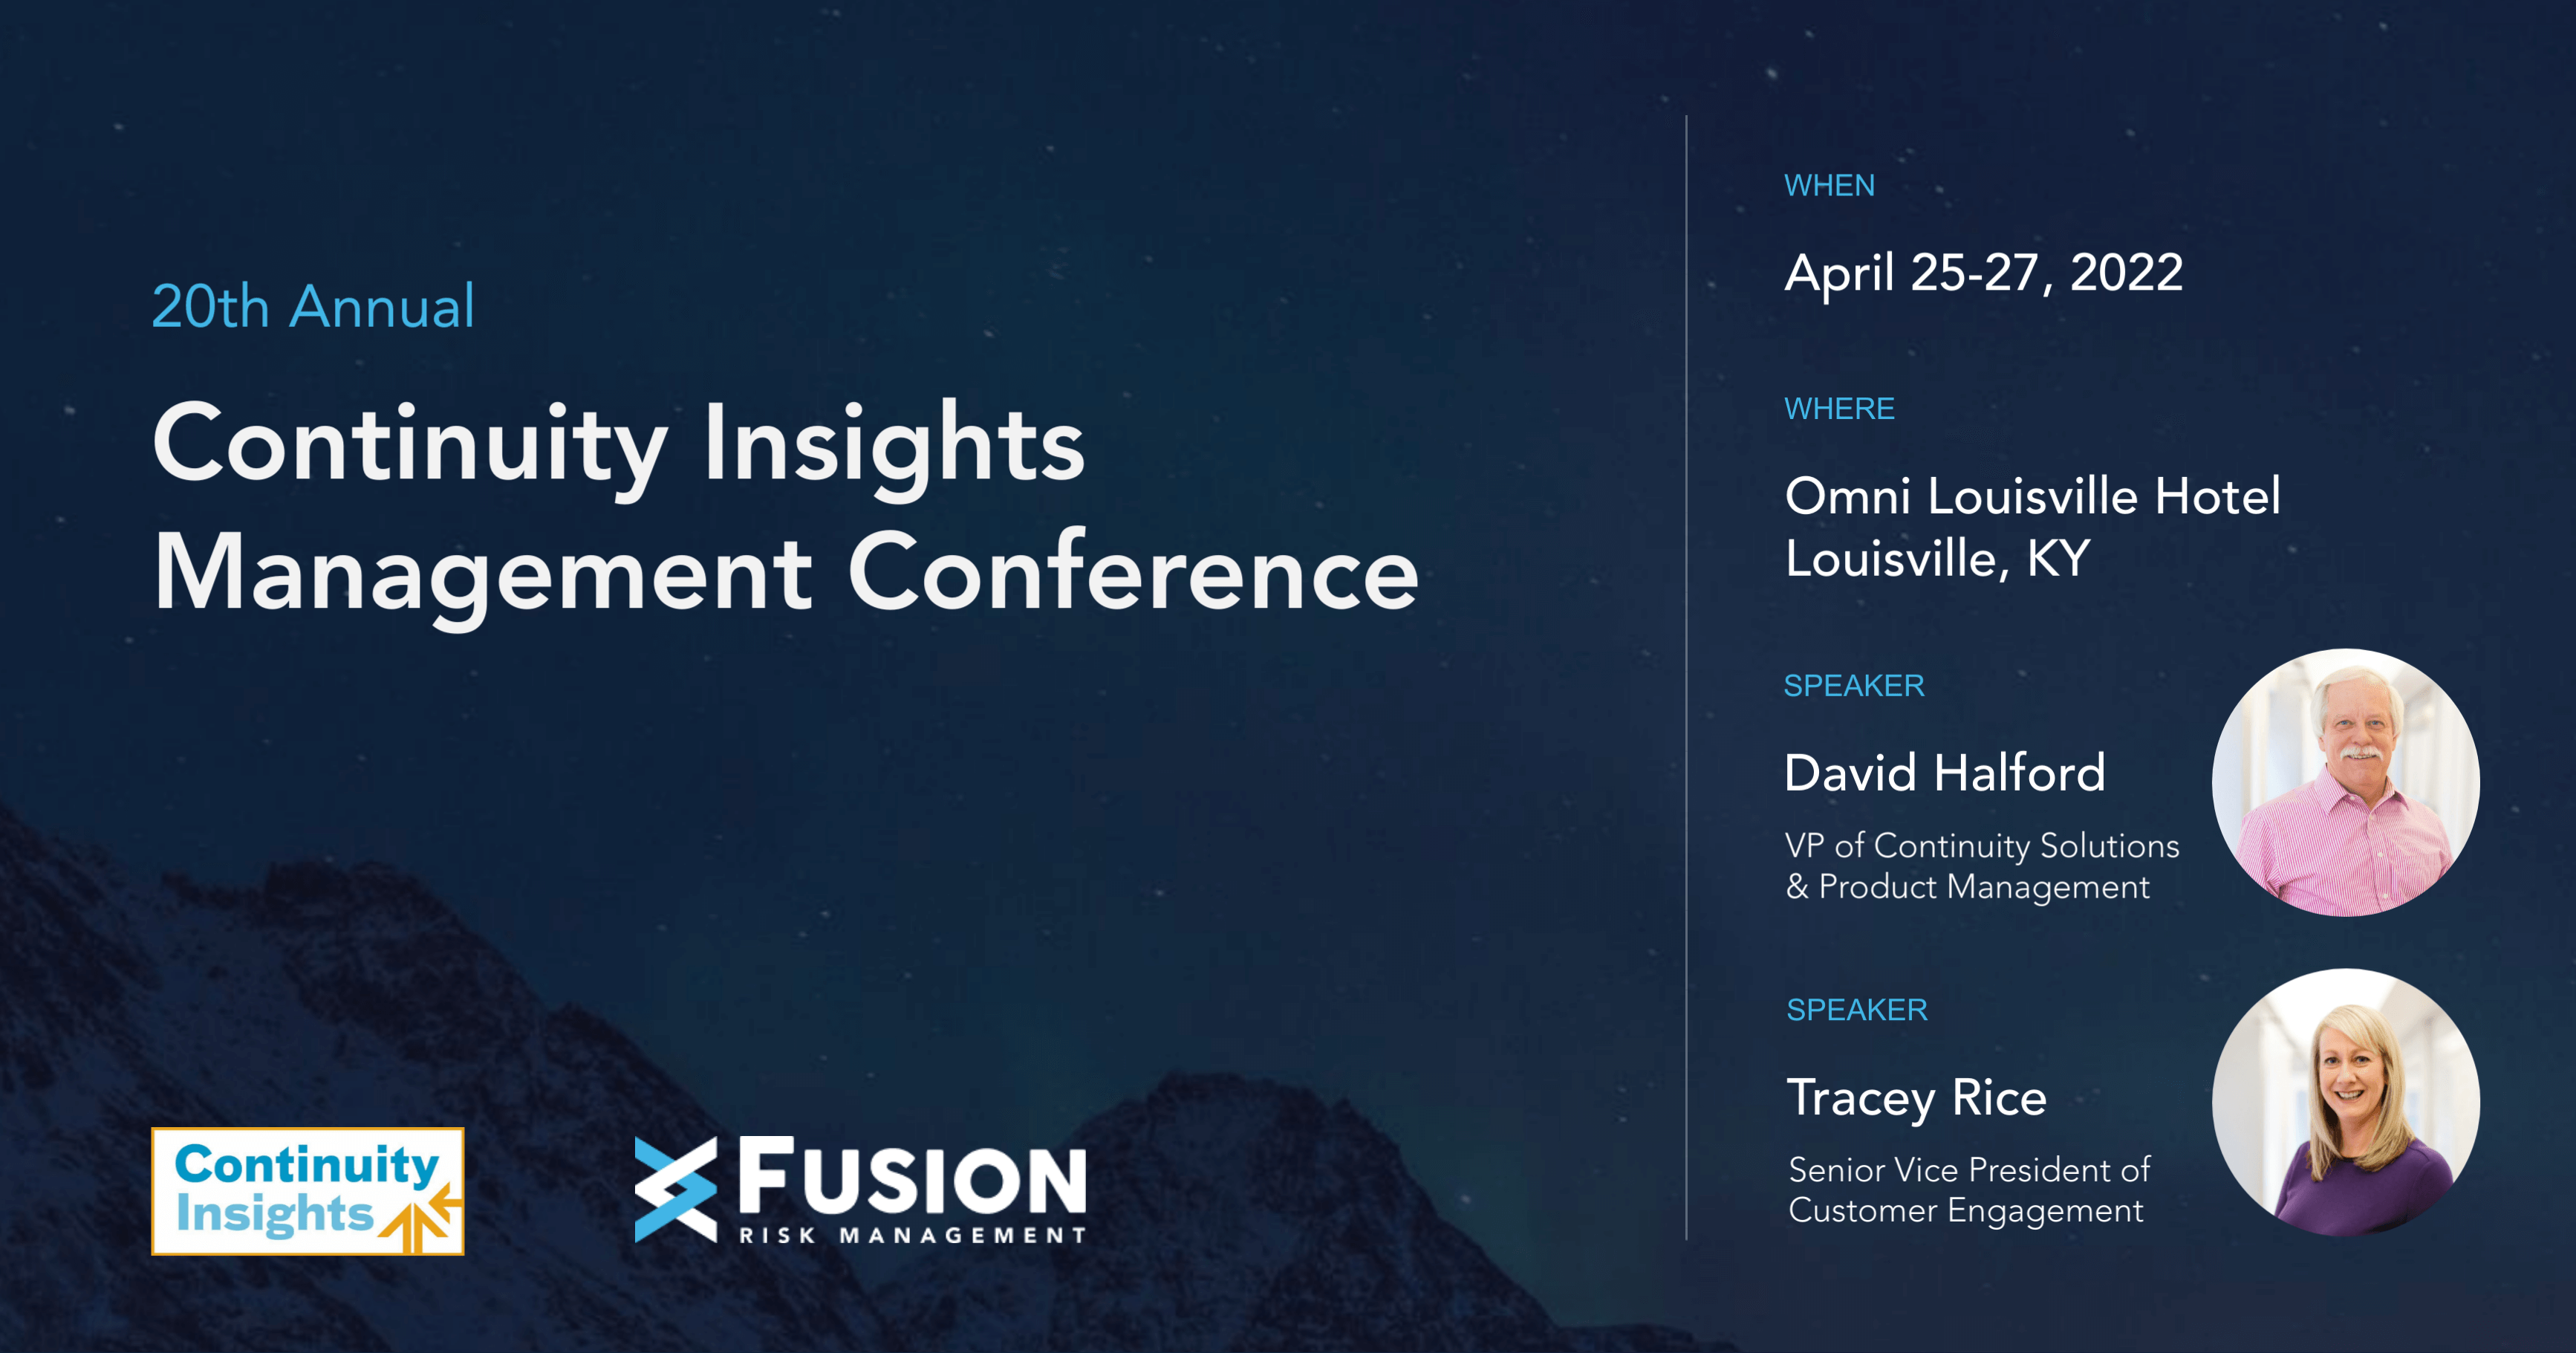 Continuity Insights Management Conference Social Card - Fusion Risk Management